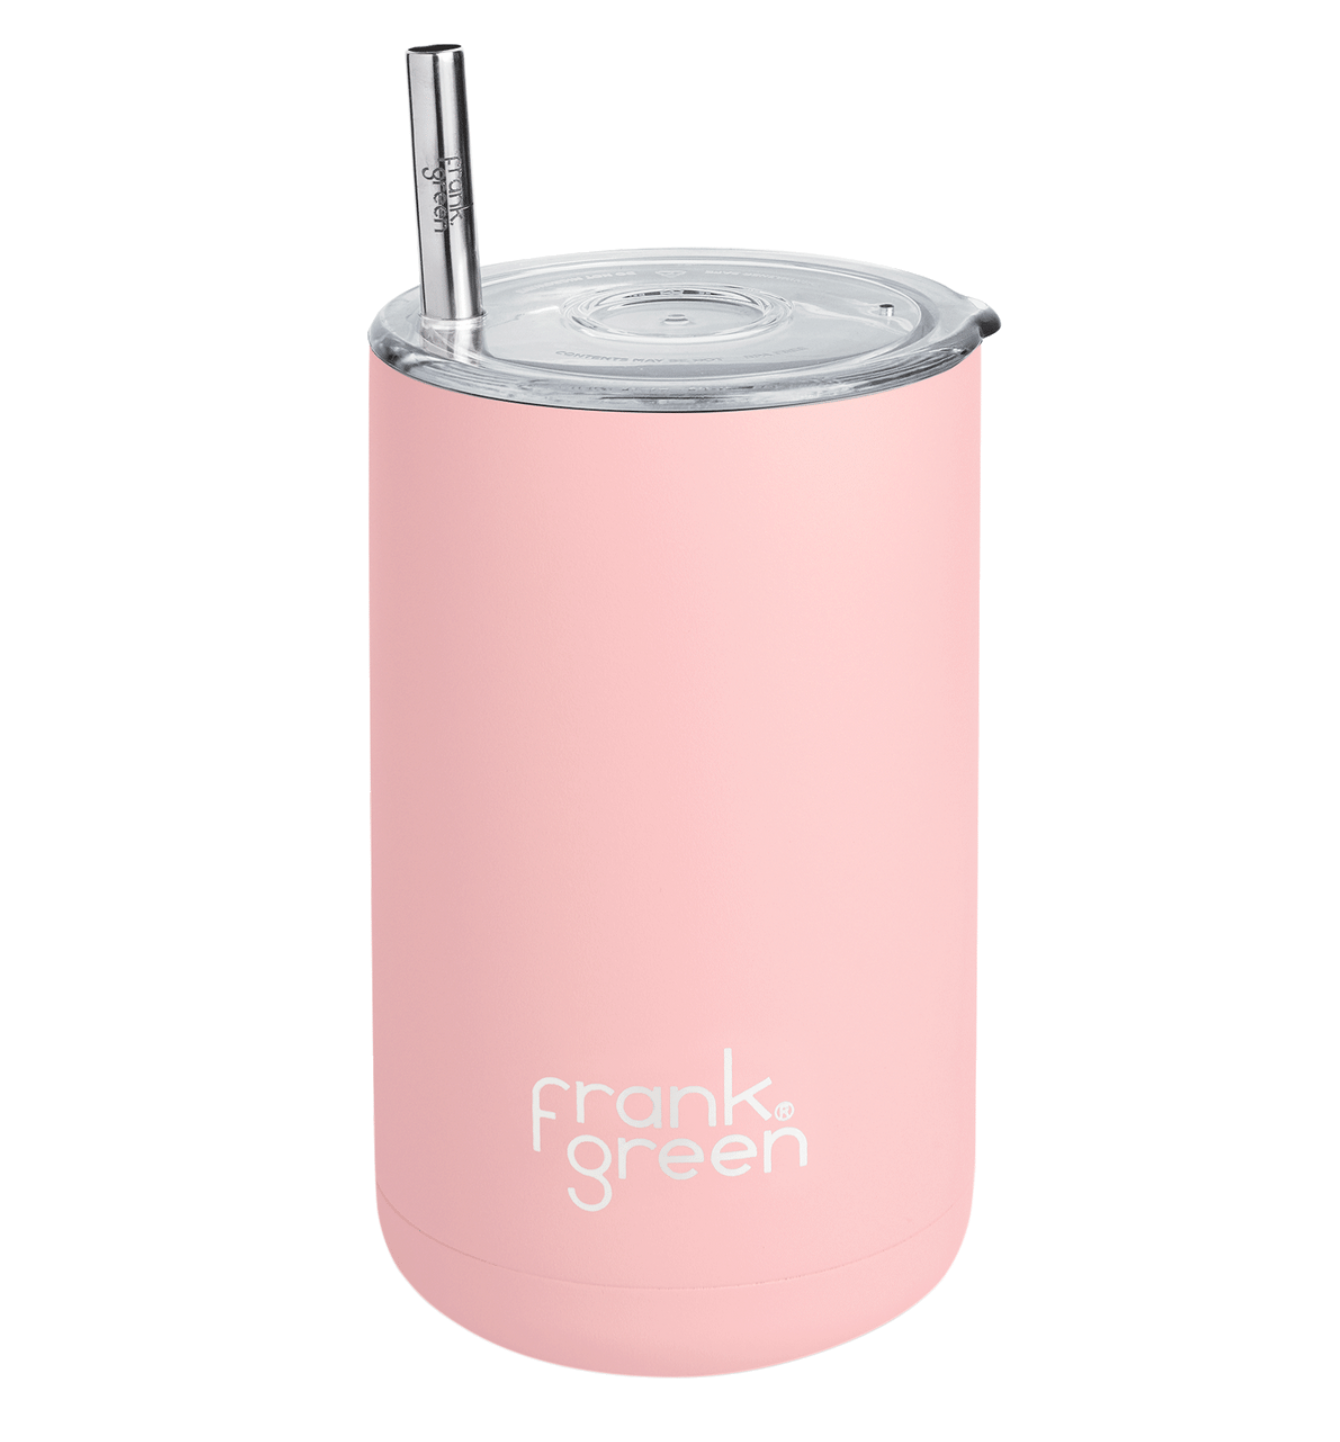 Frank Green 3-in-1 Insulated Reusable Drink Holder 150z (425ml), Neon Pink